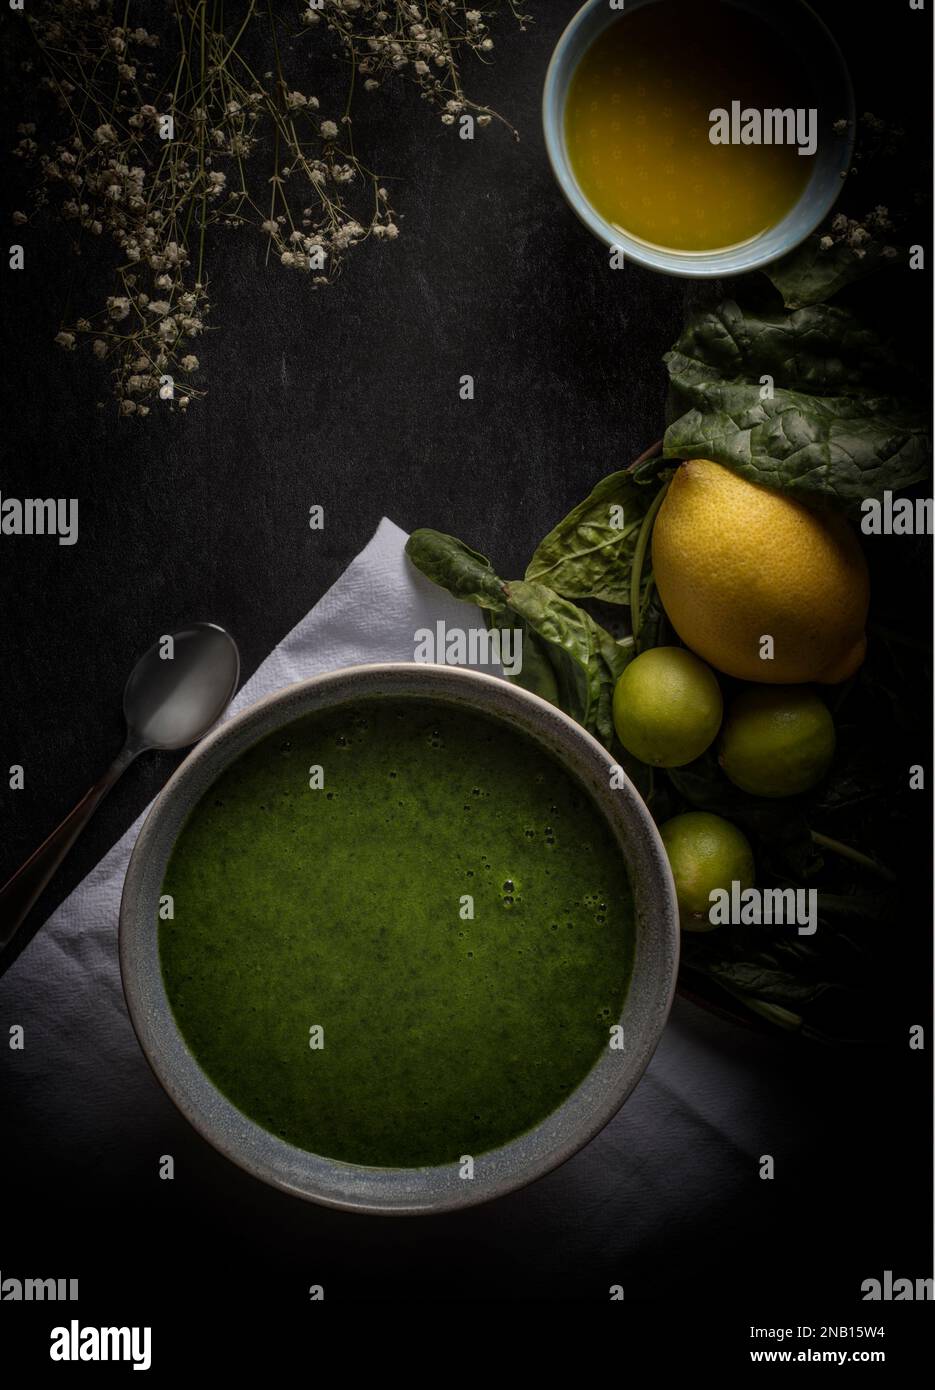 Spinach Cream with lemons, olive oil and spinach leaves. Photographed in a  Dark Mood aesthetic Stock Photo